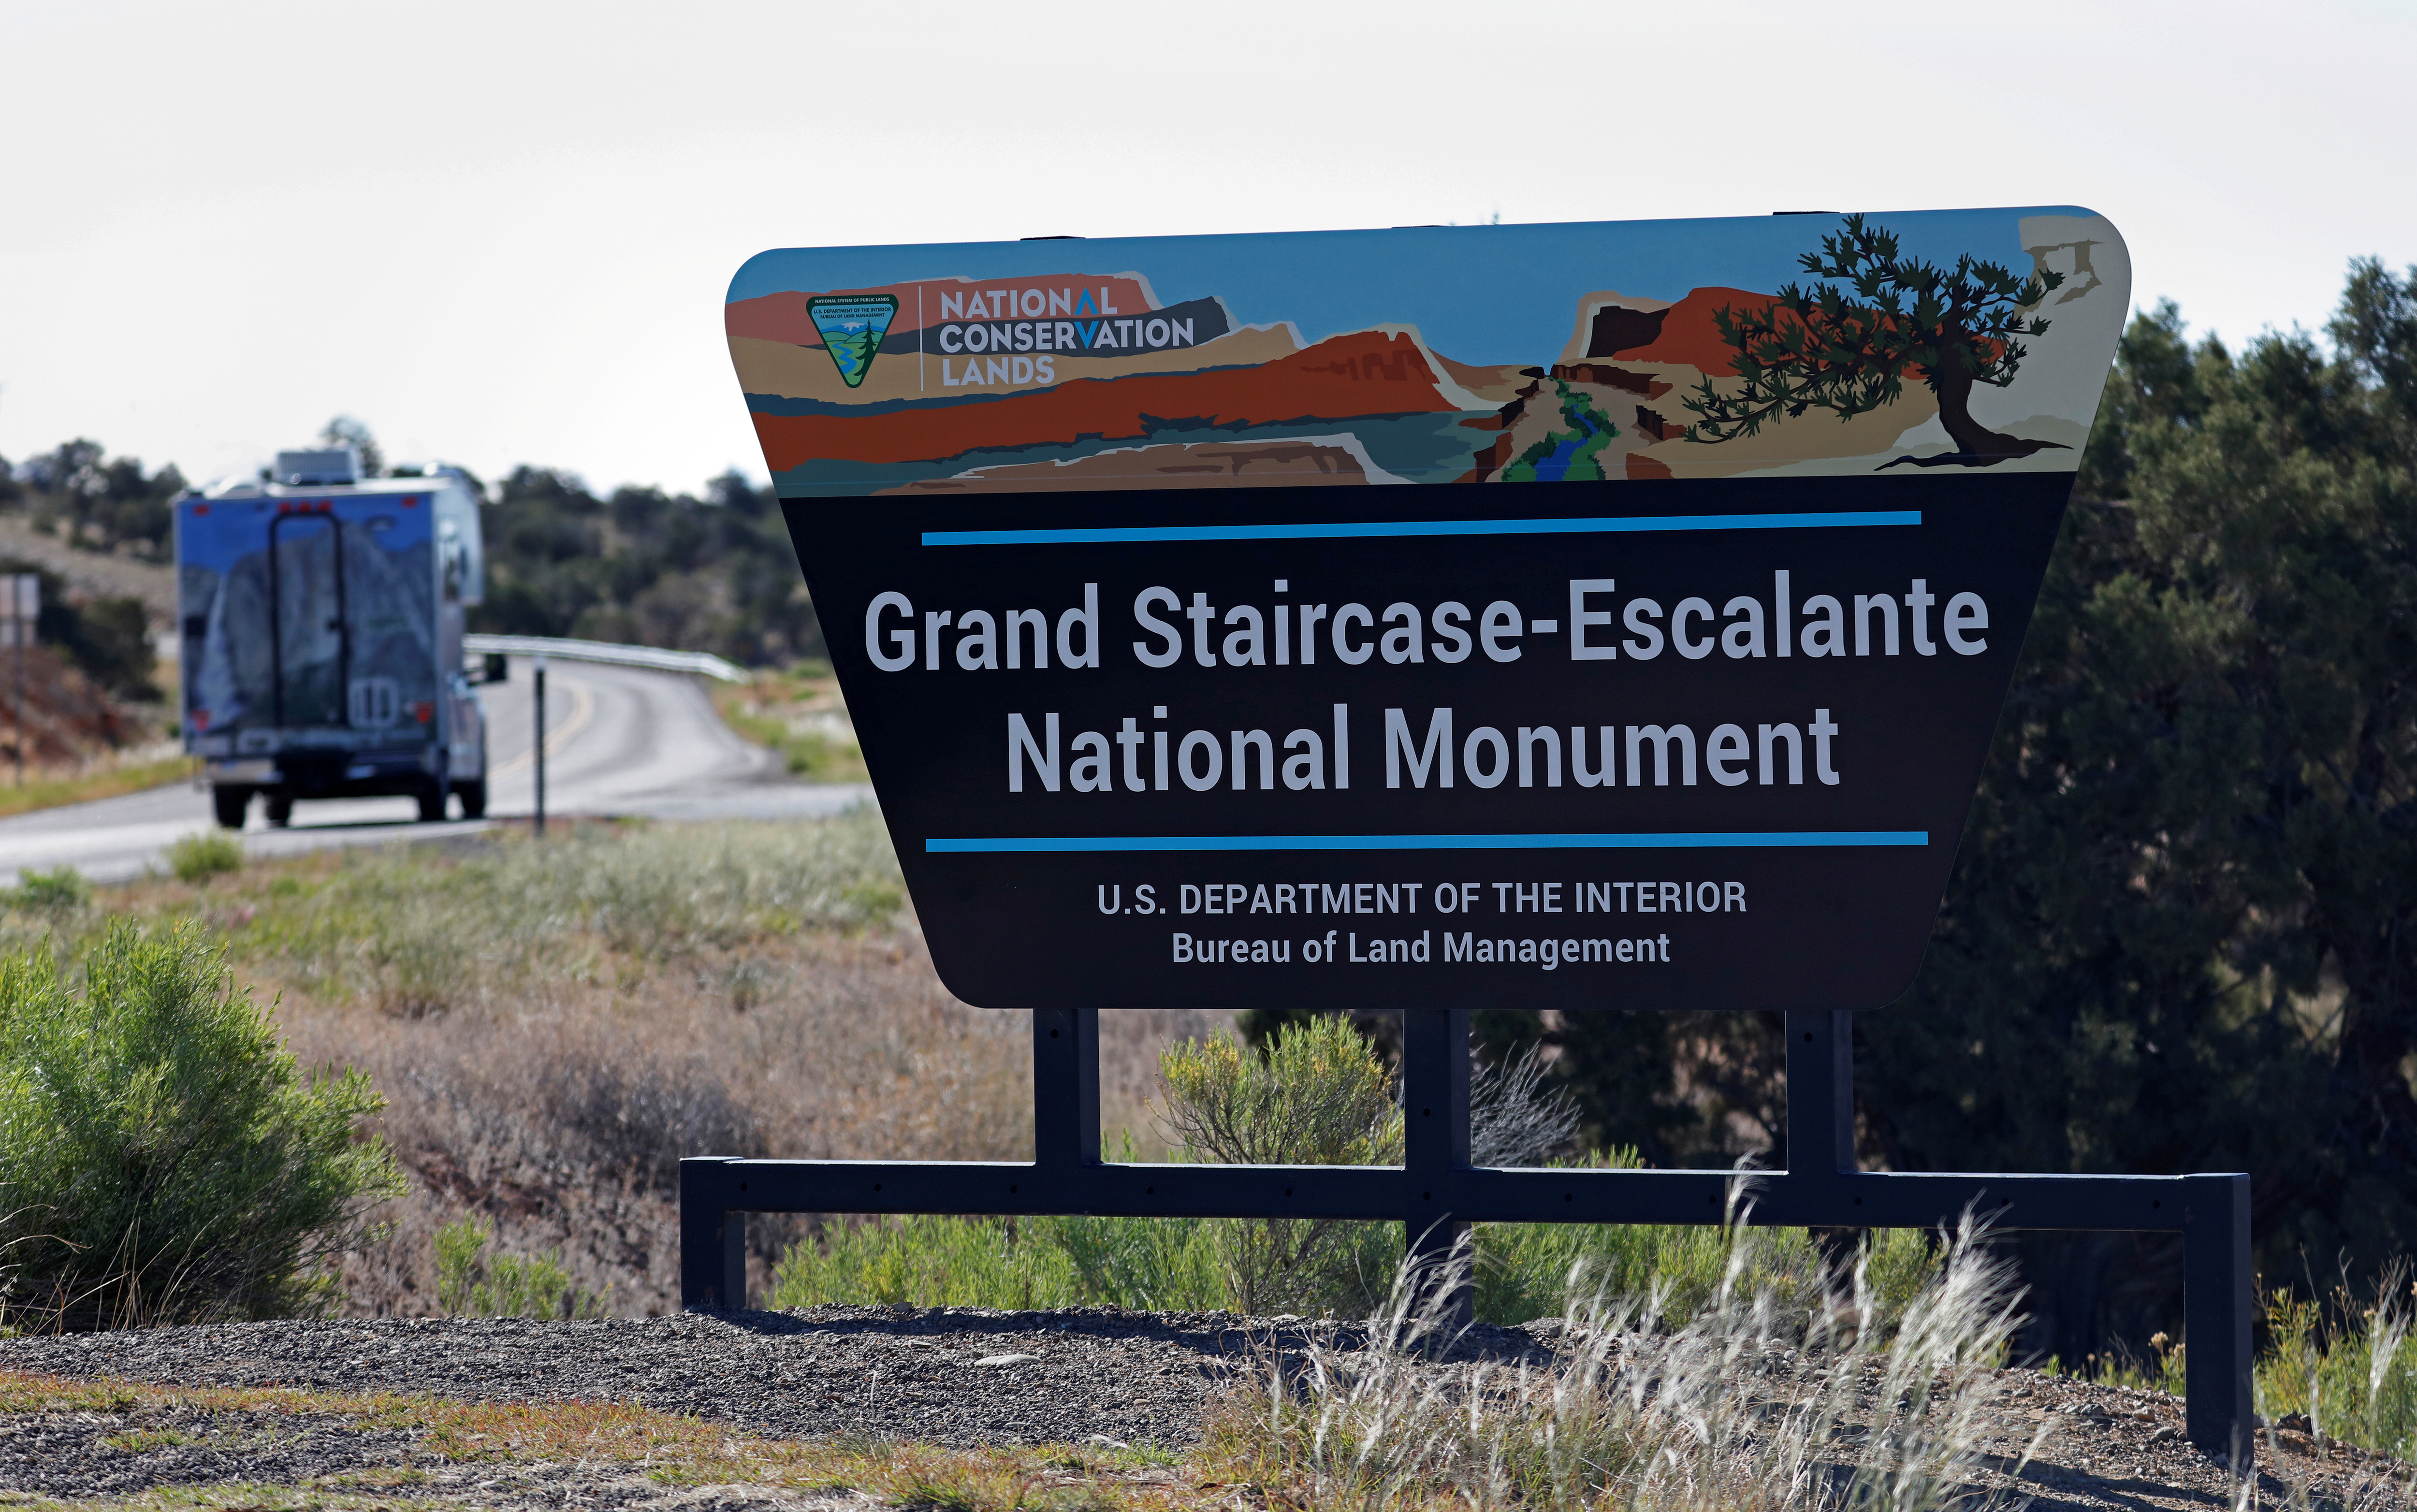 The entrance to Grand Staircase-Escalante National Monument is seen outside of Escalante, Utah